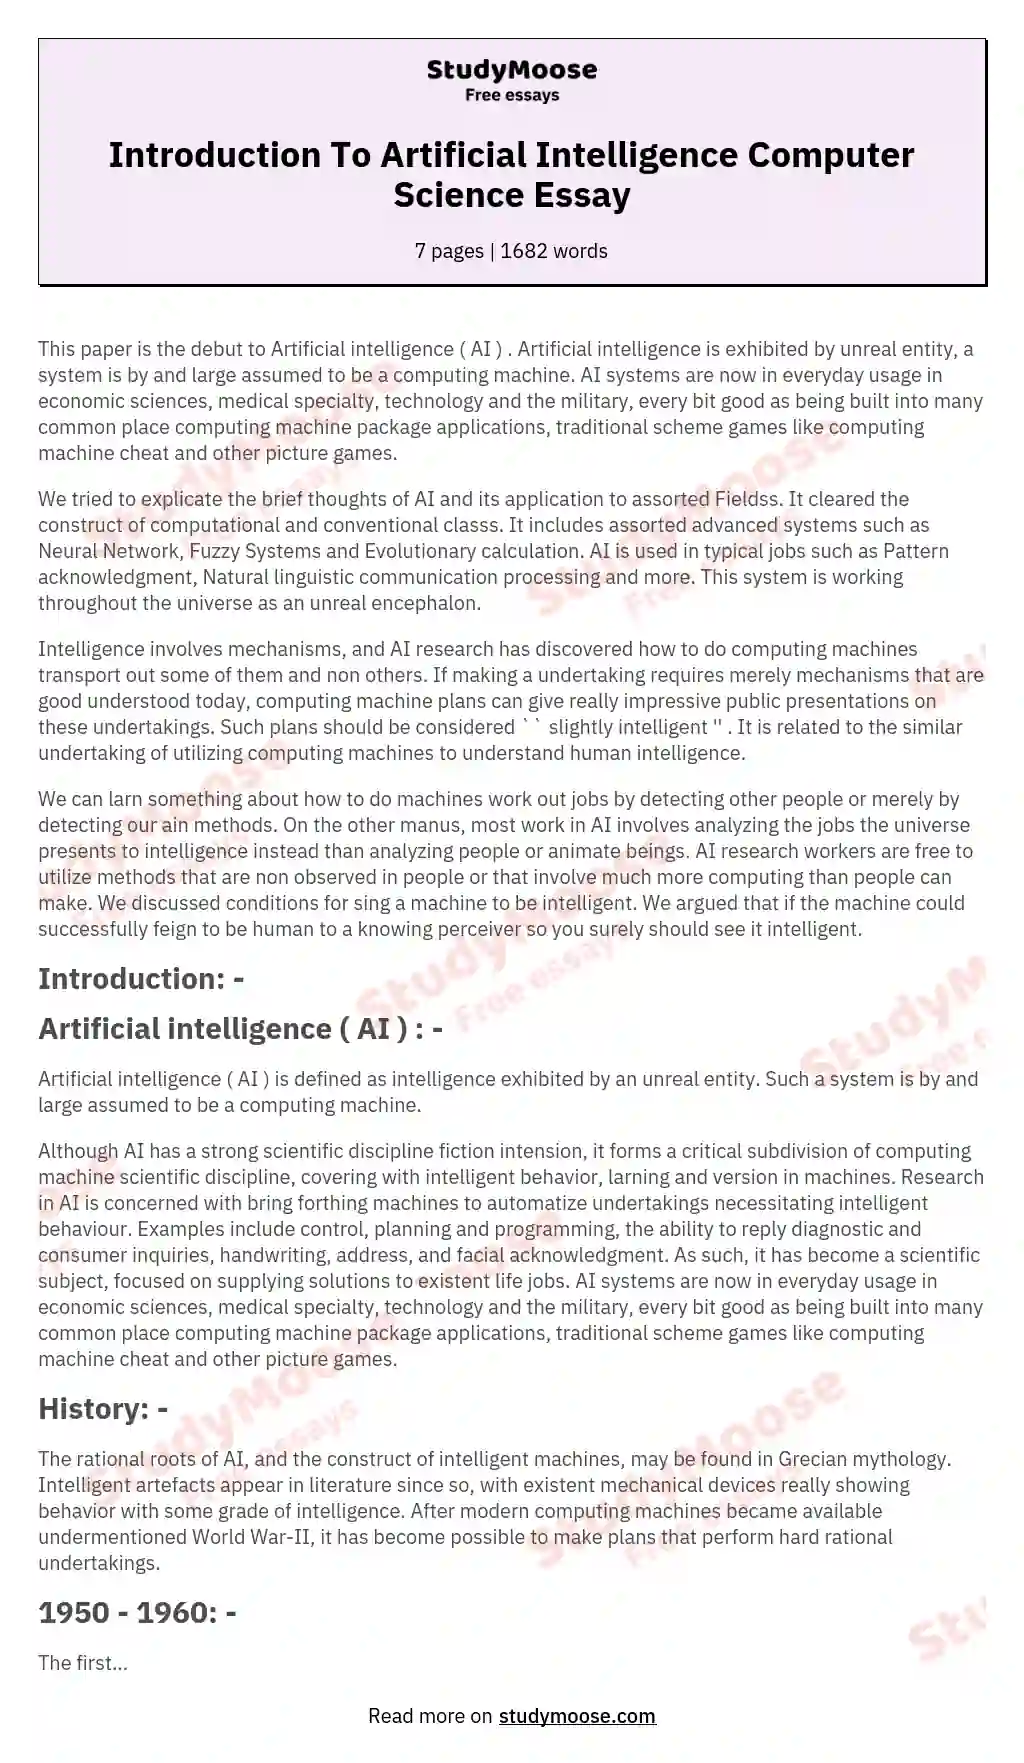 Introduction To Artificial Intelligence Computer Science Essay essay